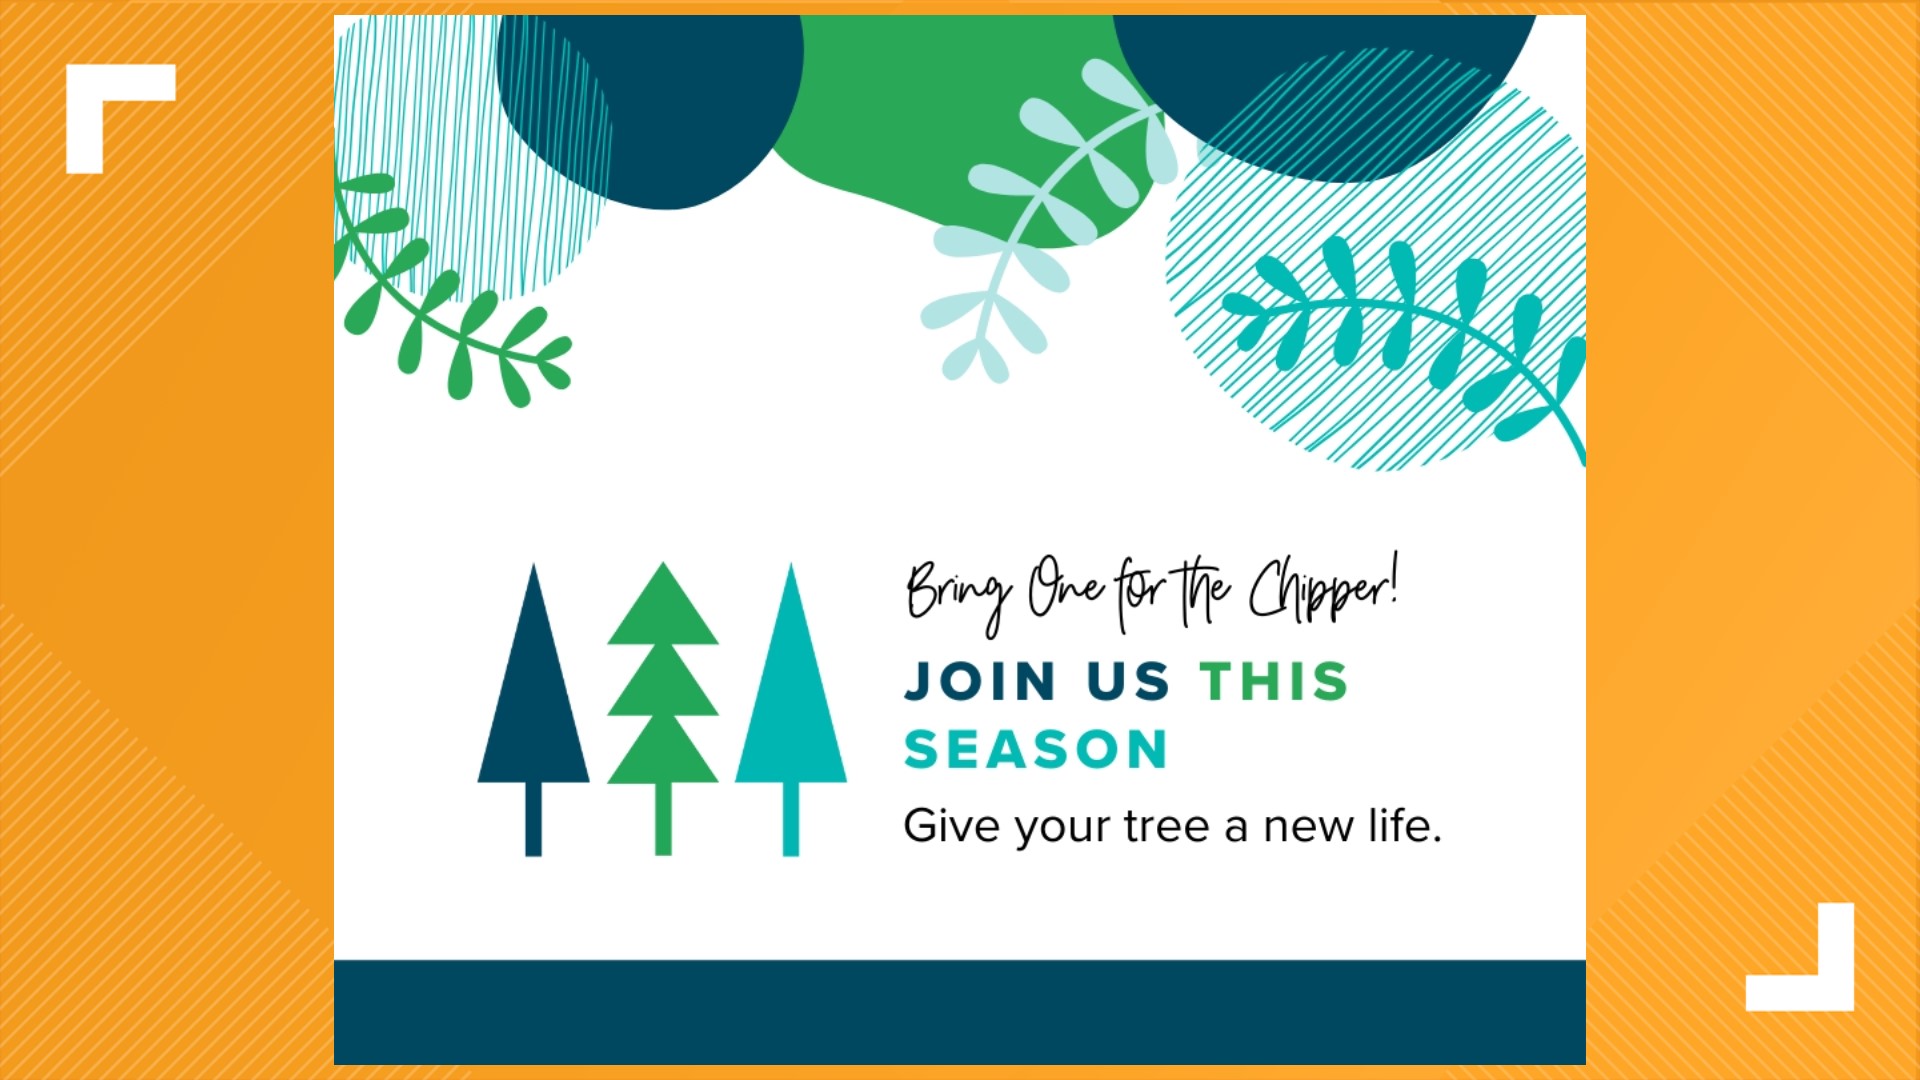 The Keep Georgia Beautiful Foundation's Bring One for the Chipper program helps Georgians recycle their Christmas trees. Drop off at one of their locations January 8